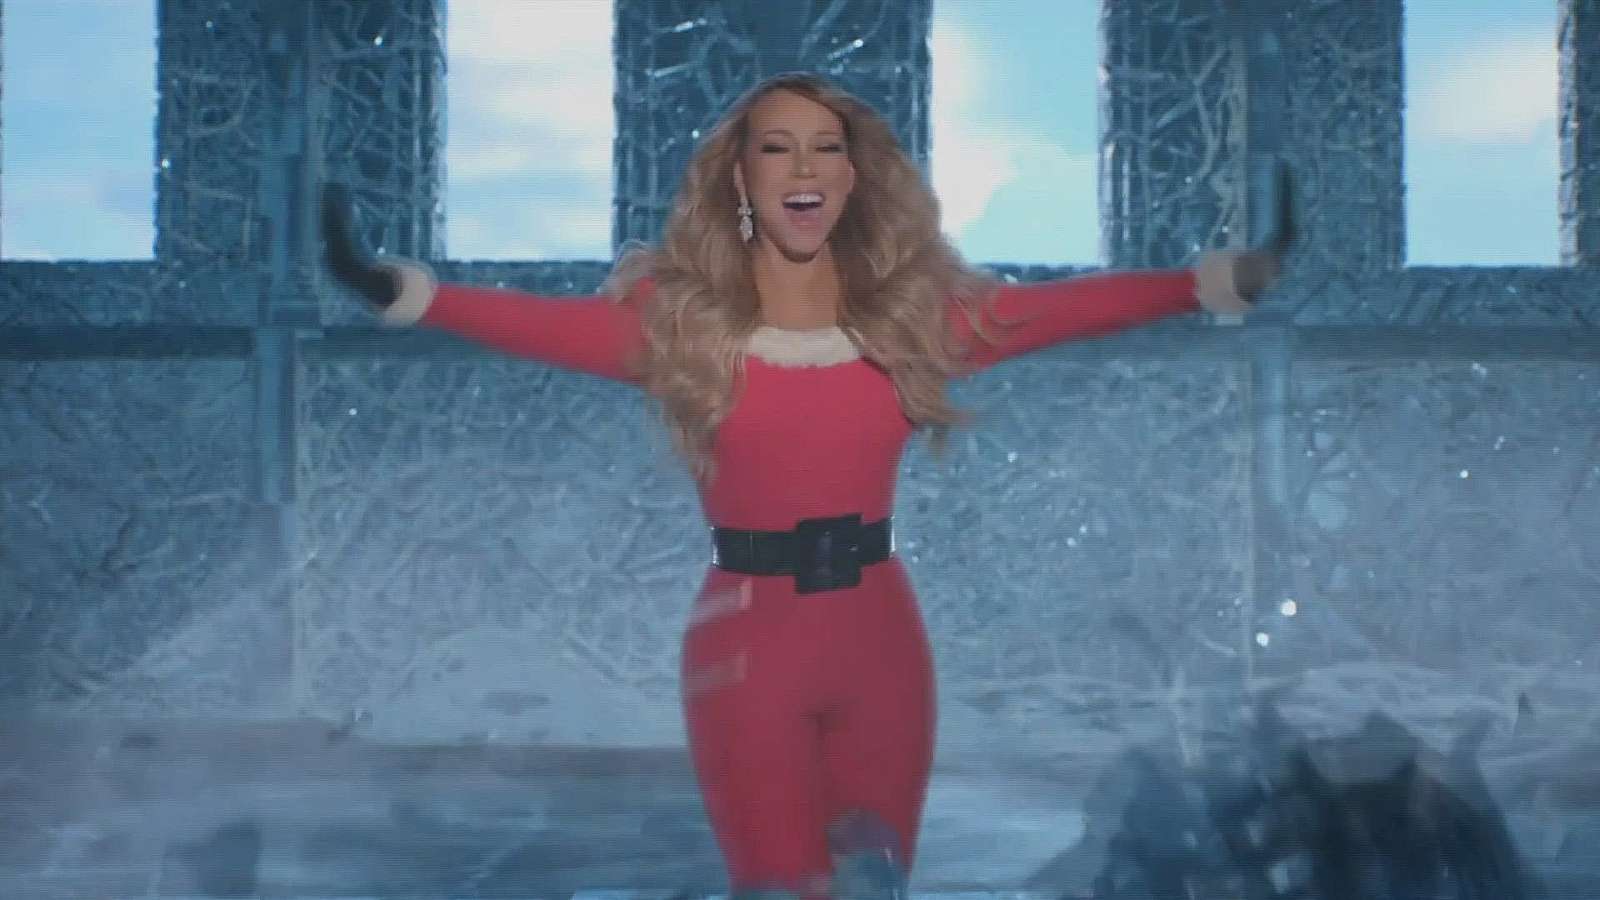 Mariah Carey singing with arms outstretched in viral TikTok video